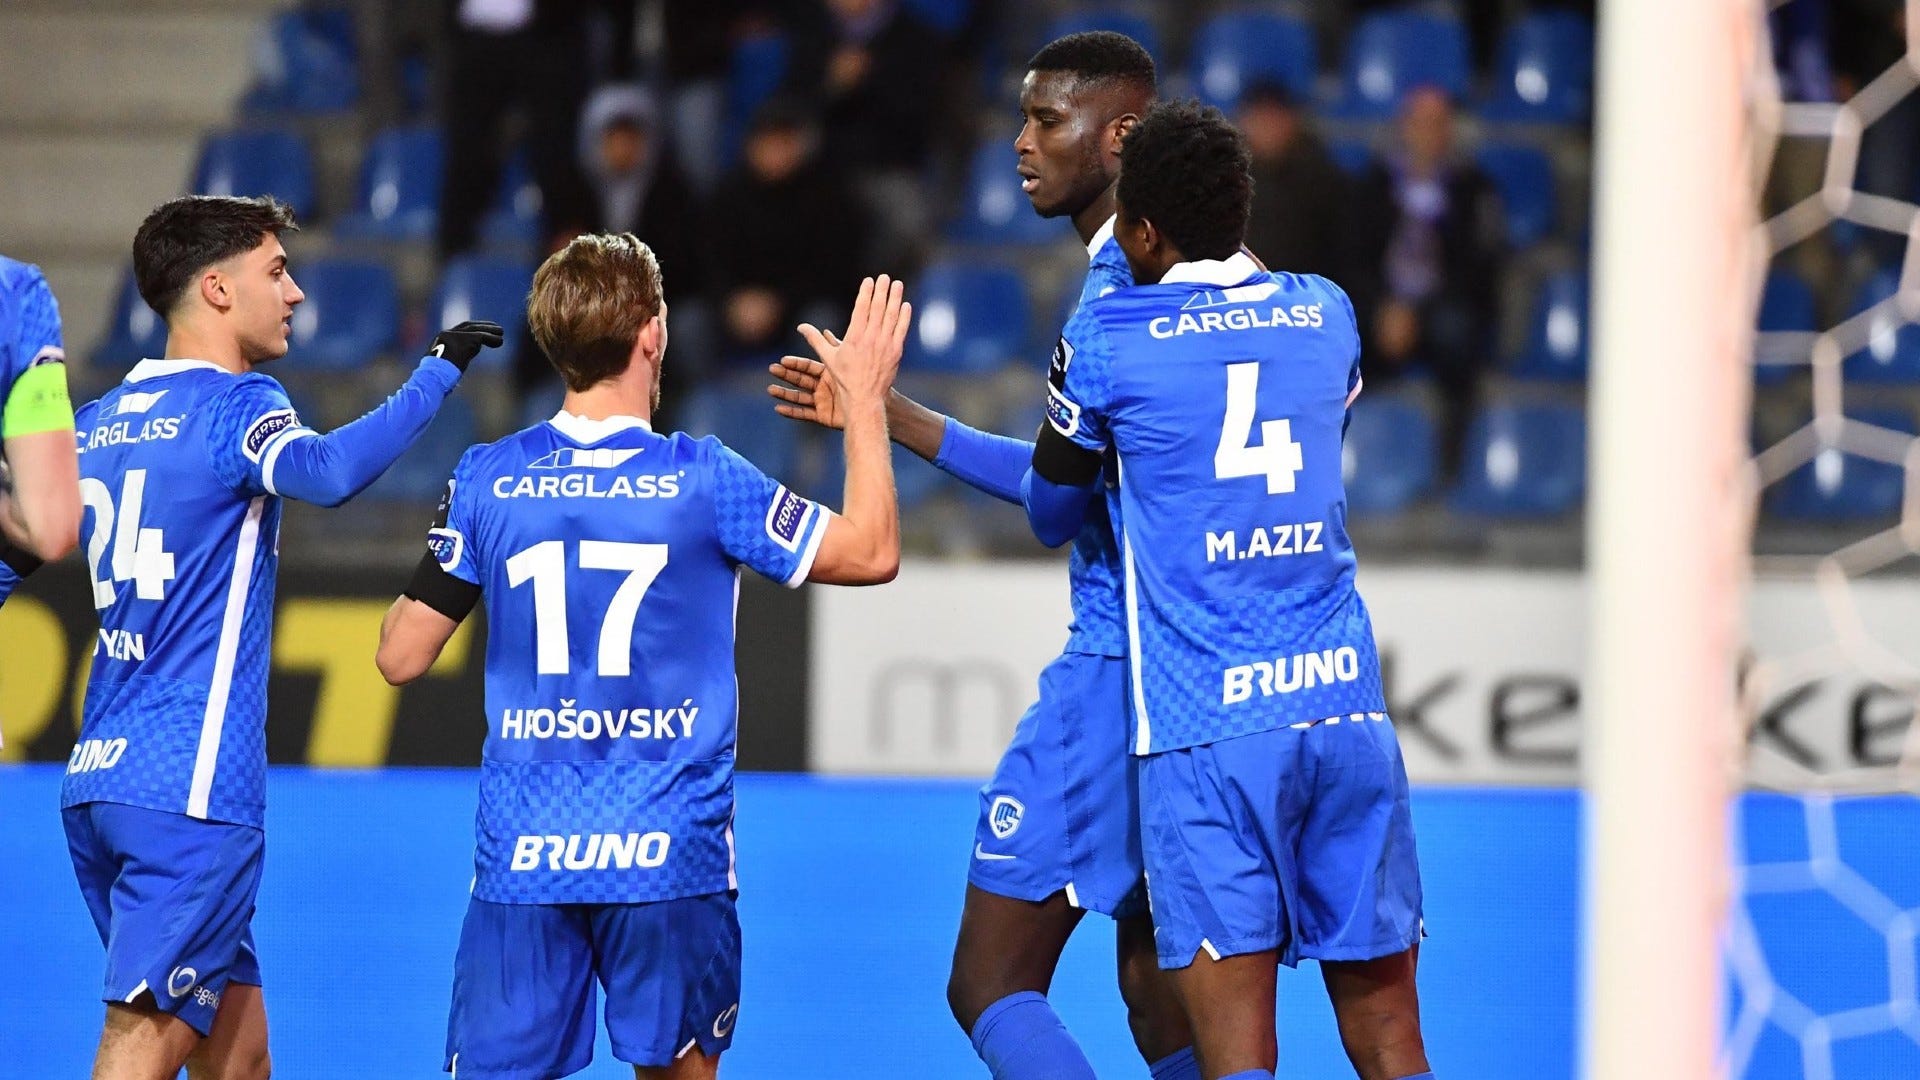 KRC Genk game today on live stream & TV